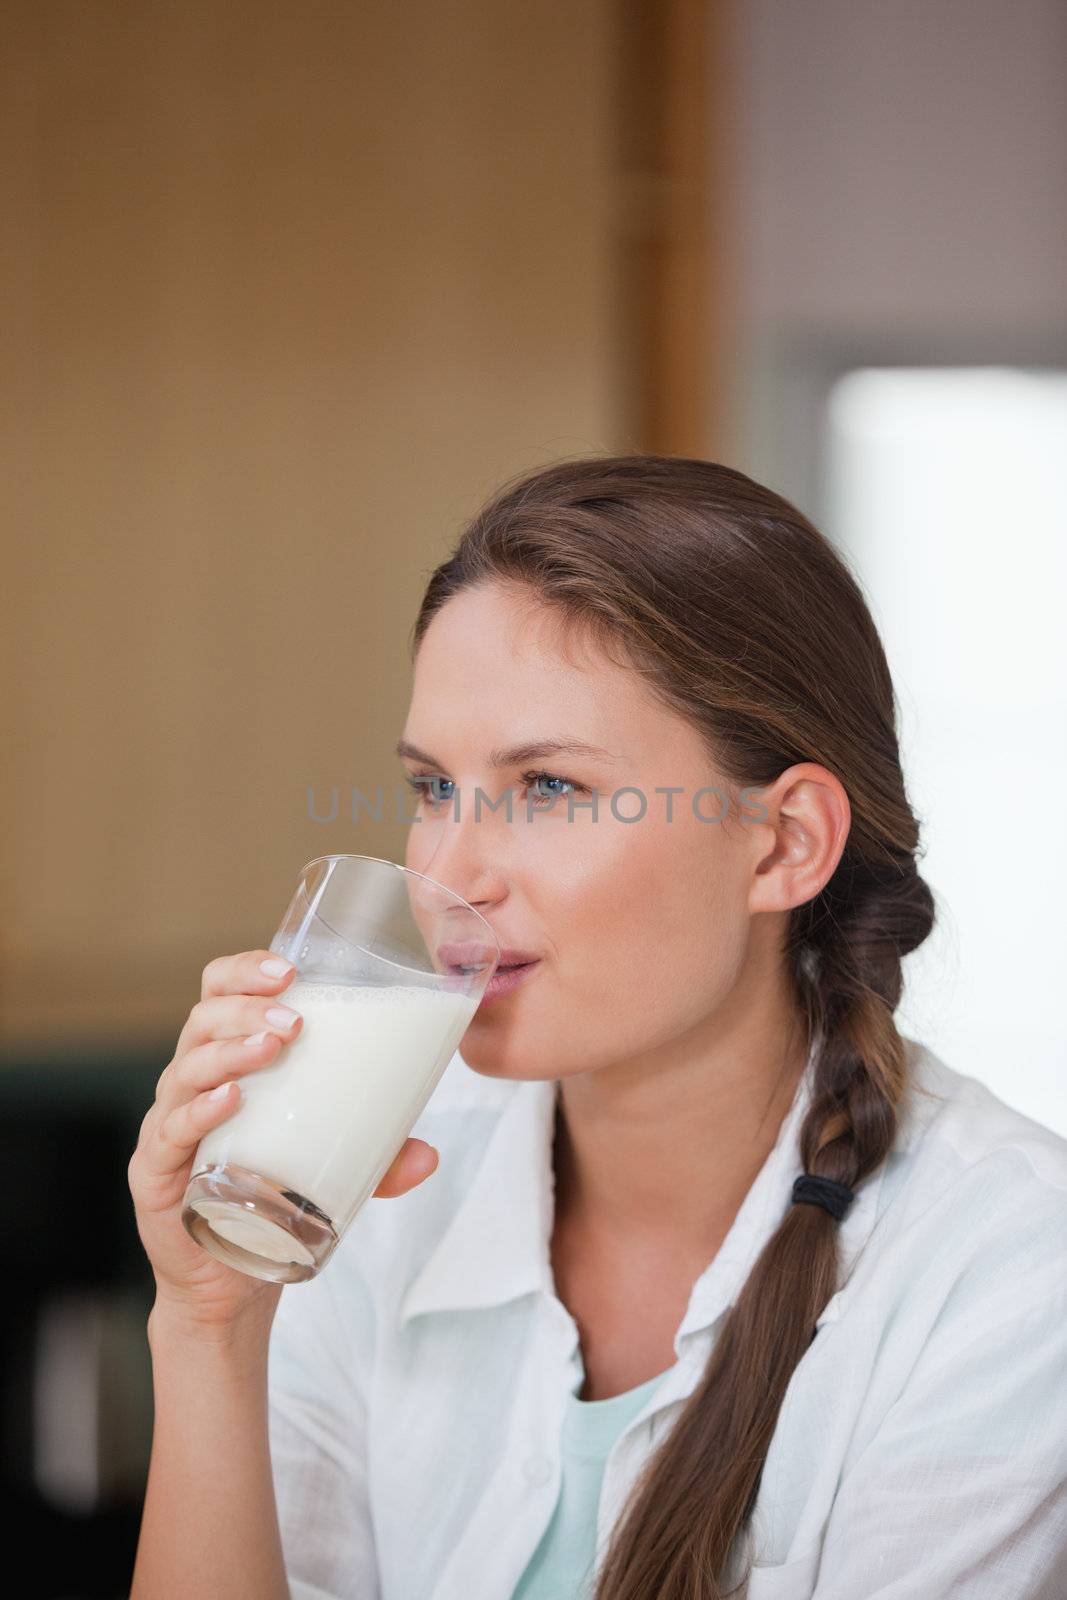 Woman drinking a glass of milk while looking away in a kitchen